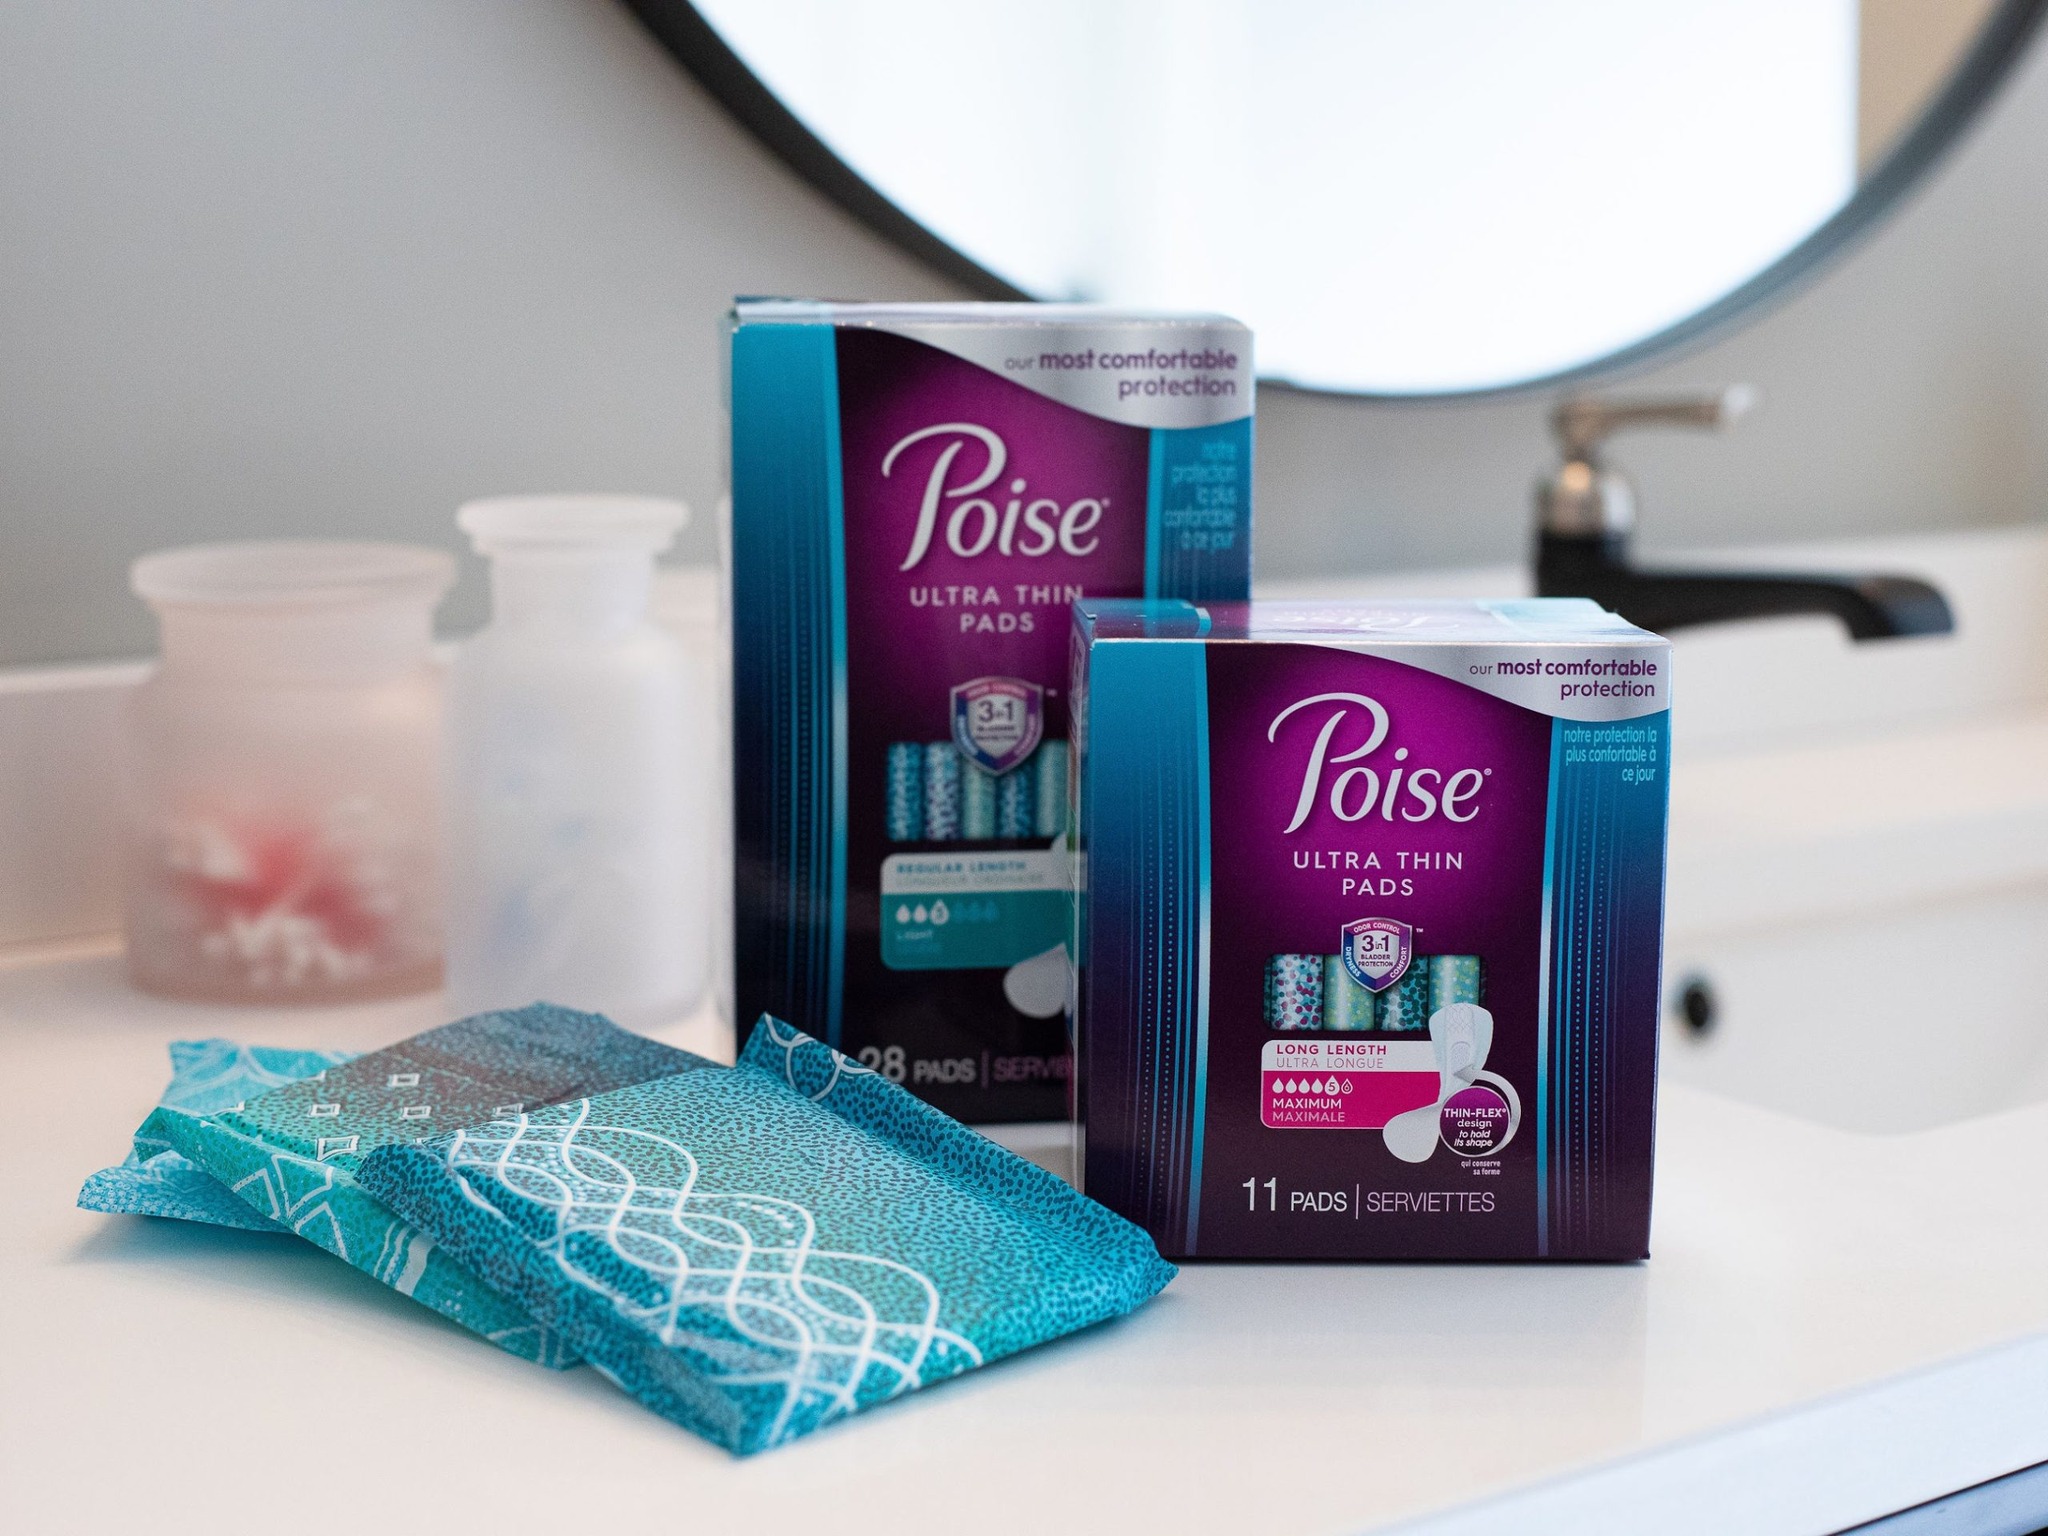 Poise Pads As Low As $3.89 At Publix (Regular Price $8.39) - iHeartPublix